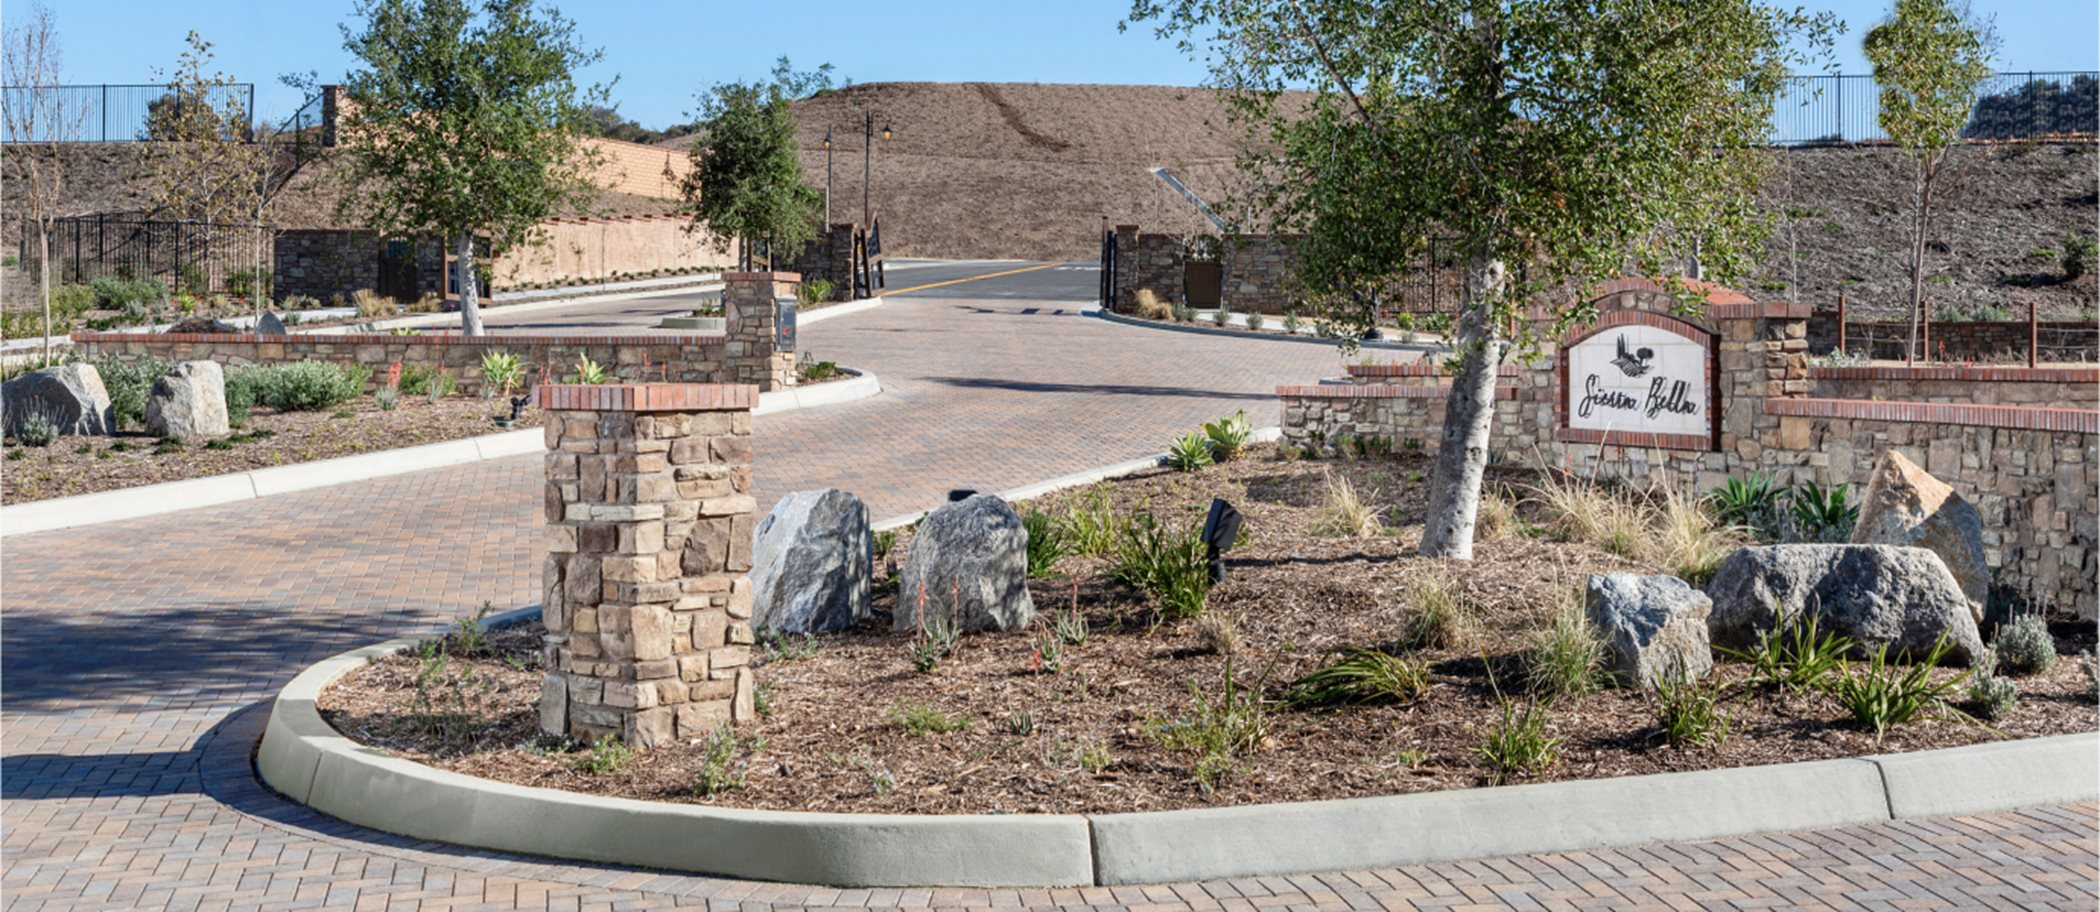 Sierra Bella new homes for sale that offers gorgeous natural surroundings